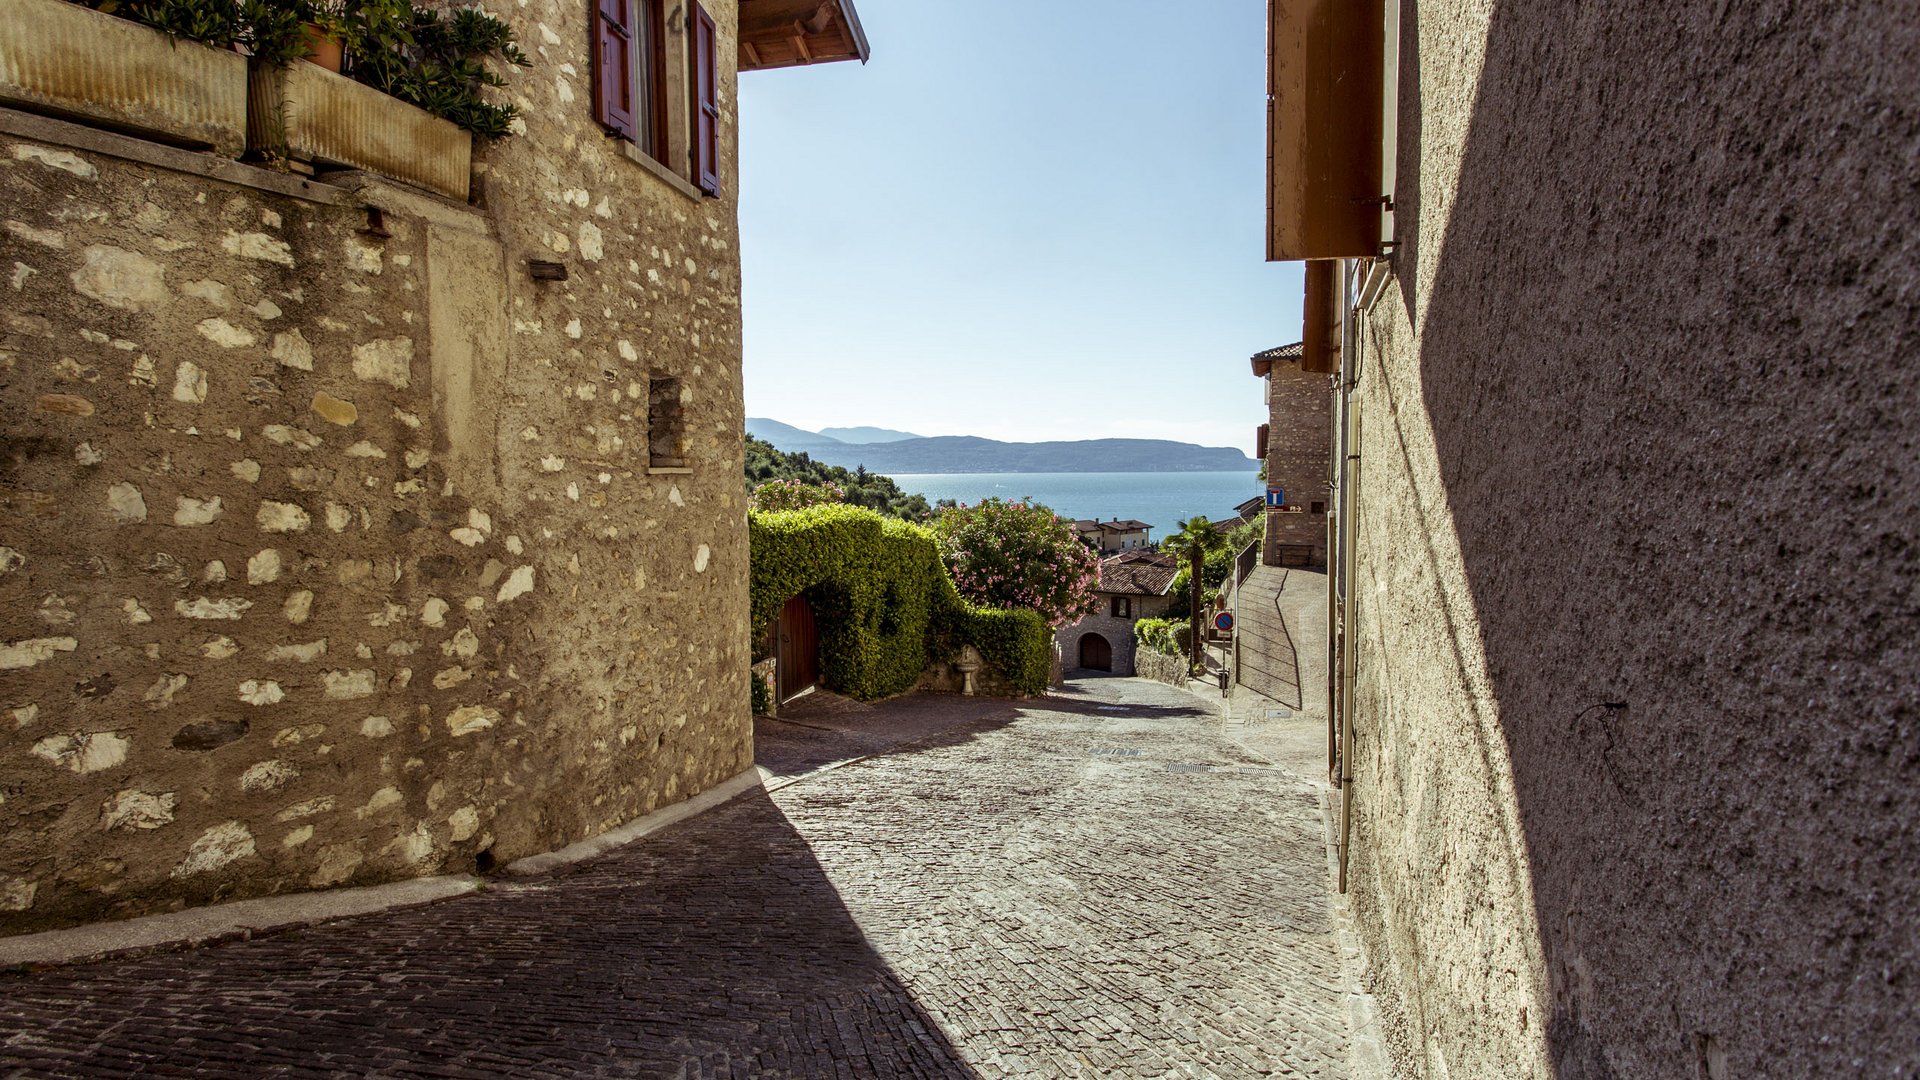 So many possibilities on your summer holiday at Lake Garda!